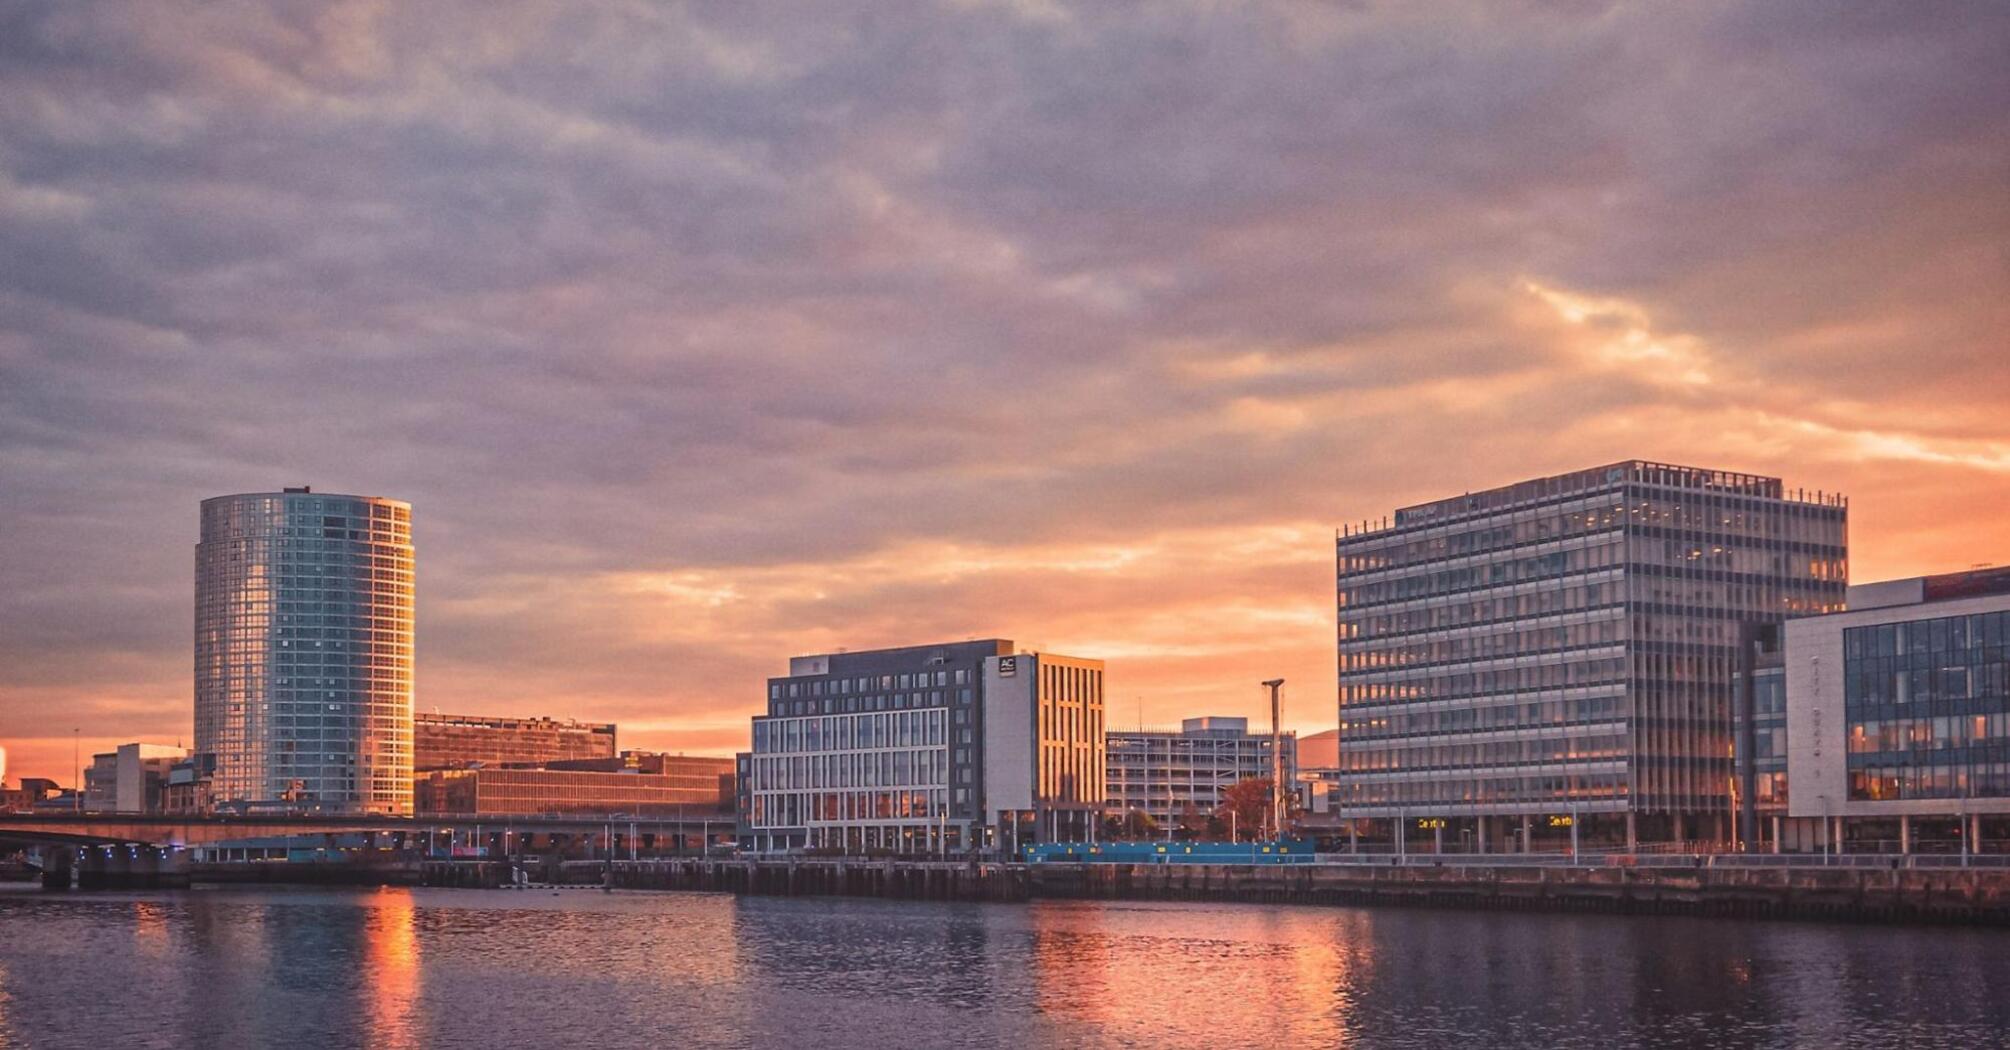 Sunset over the Belfast waterfront with modern buildings reflecting on the water